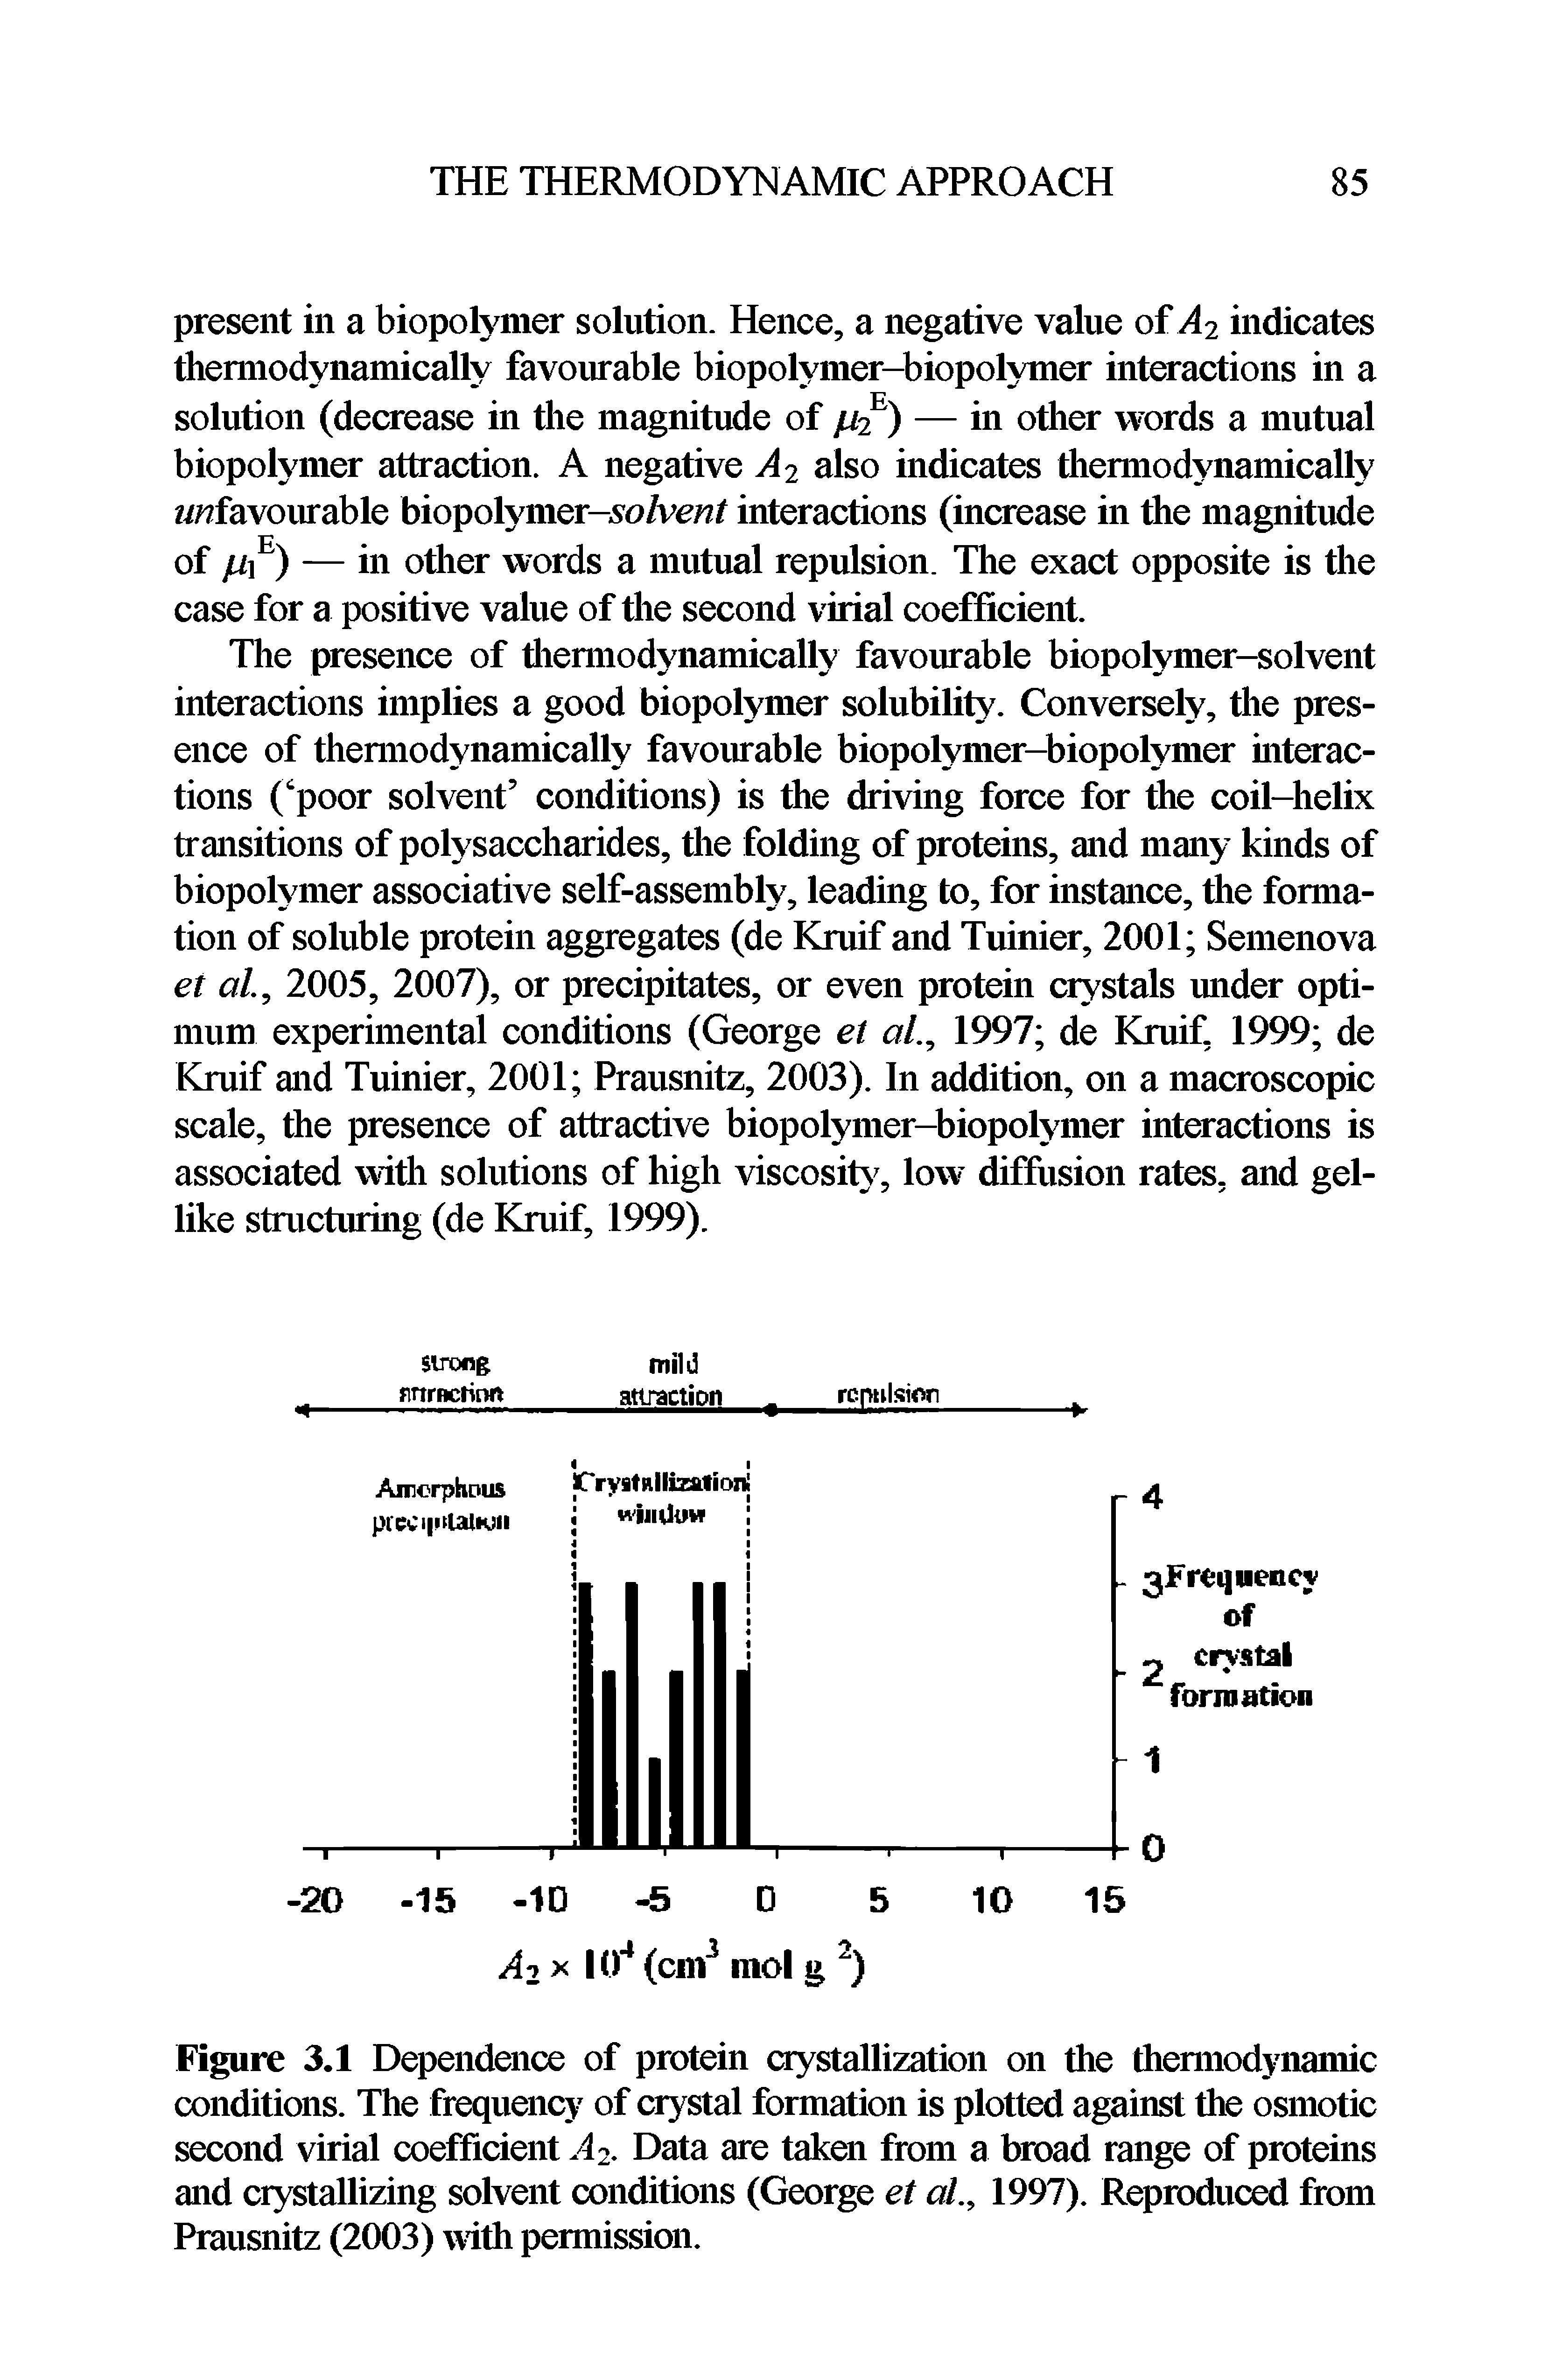 Figure 3.1 Dependence of protein crystallization on the thermodynamic conditions. The frequency of crystal formation is plotted against the osmotic second virial coefficient A2. Data are taken from a broad range of proteins and crystallizing solvent conditions (George et al1997). Reproduced from Prausnitz (2003) with permission.